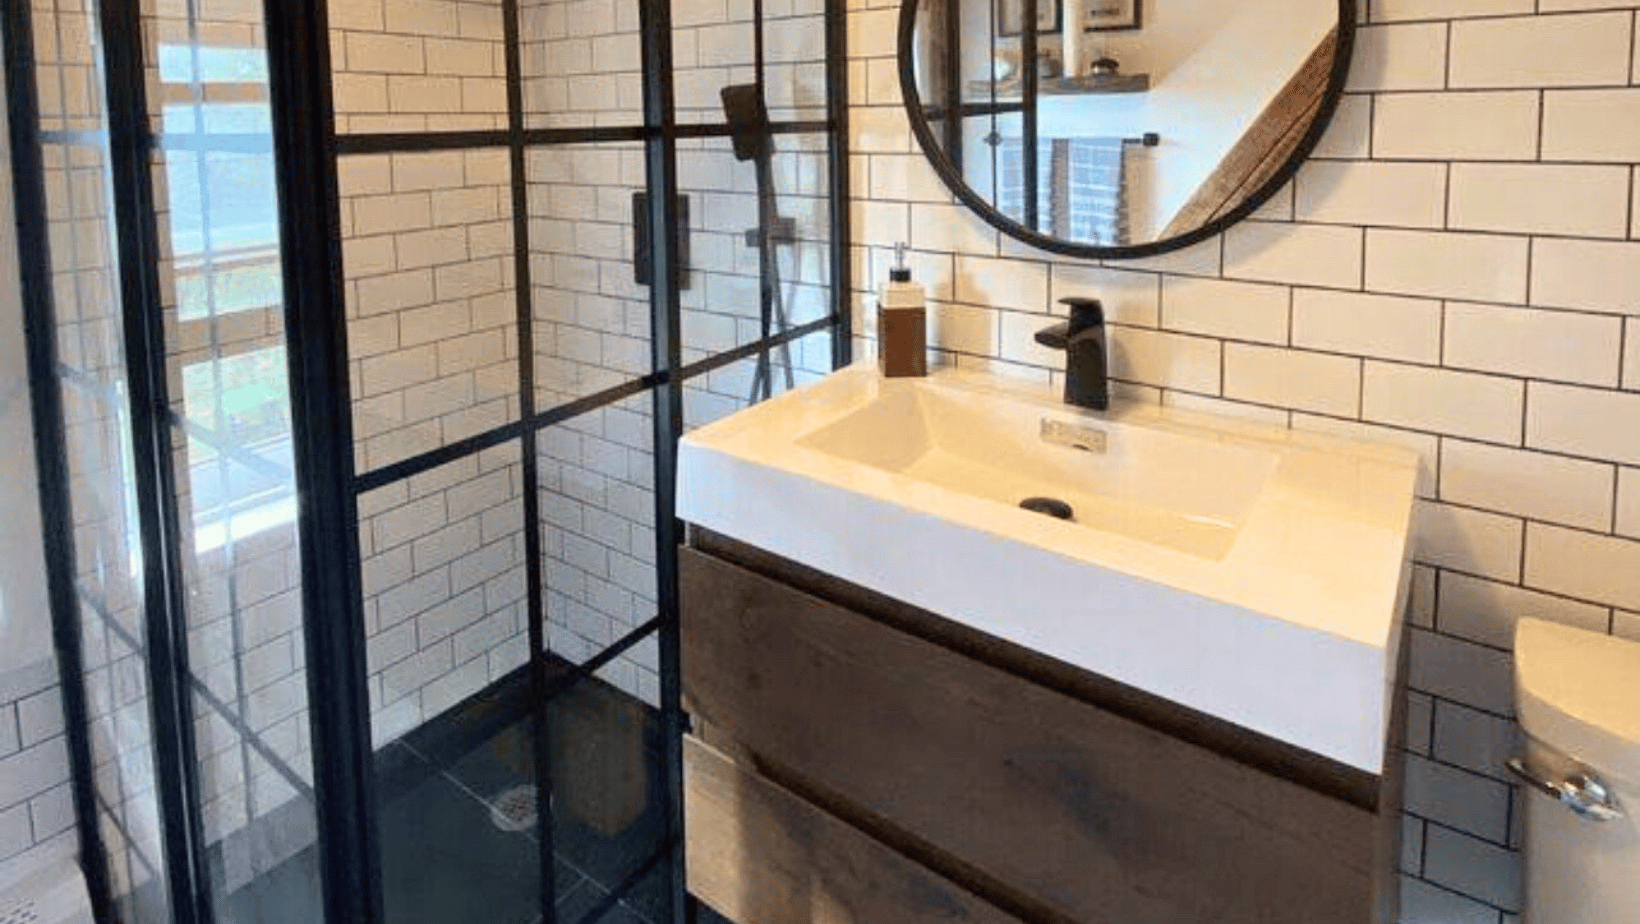 19 Practical And Ingenious Bathroom Gadgets - Keep Up With The Trends